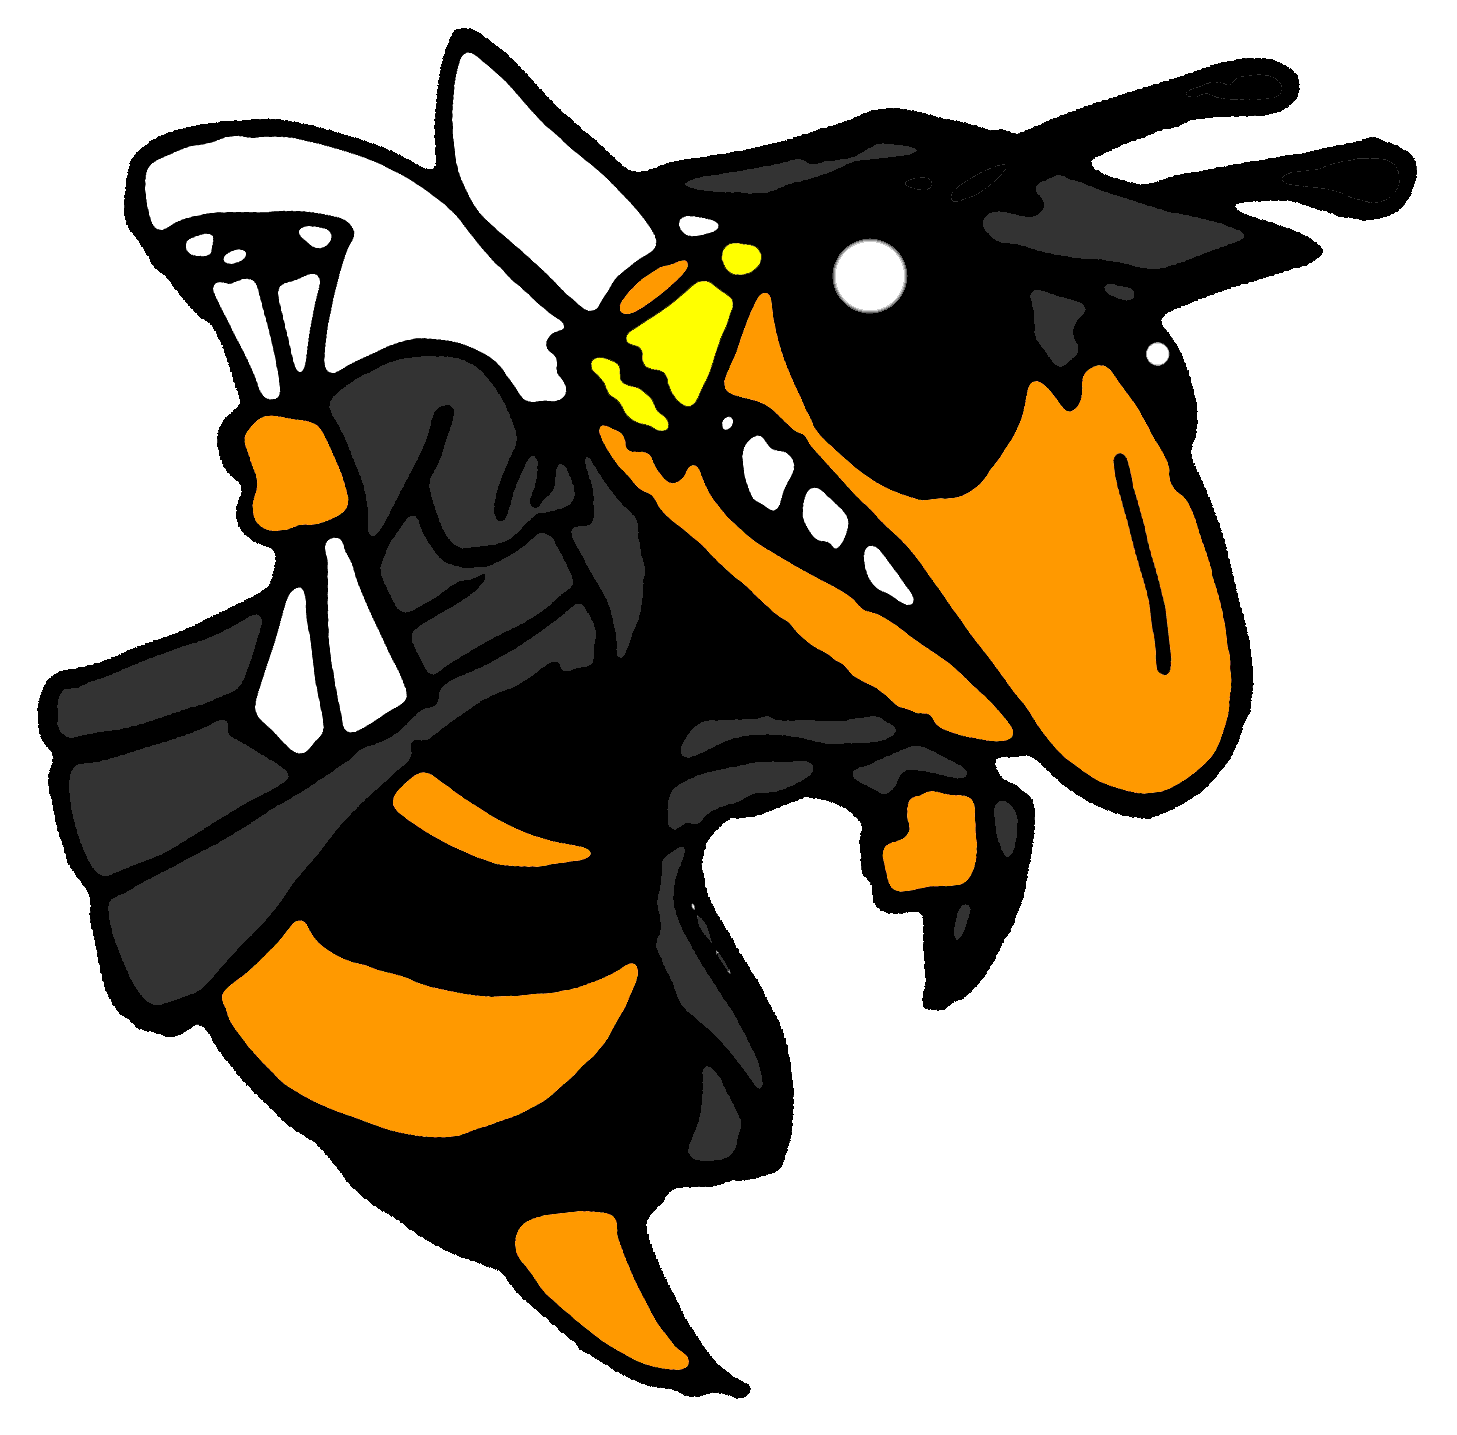 Free Yellow Jacket Mascot Clipart - ClipArt Best